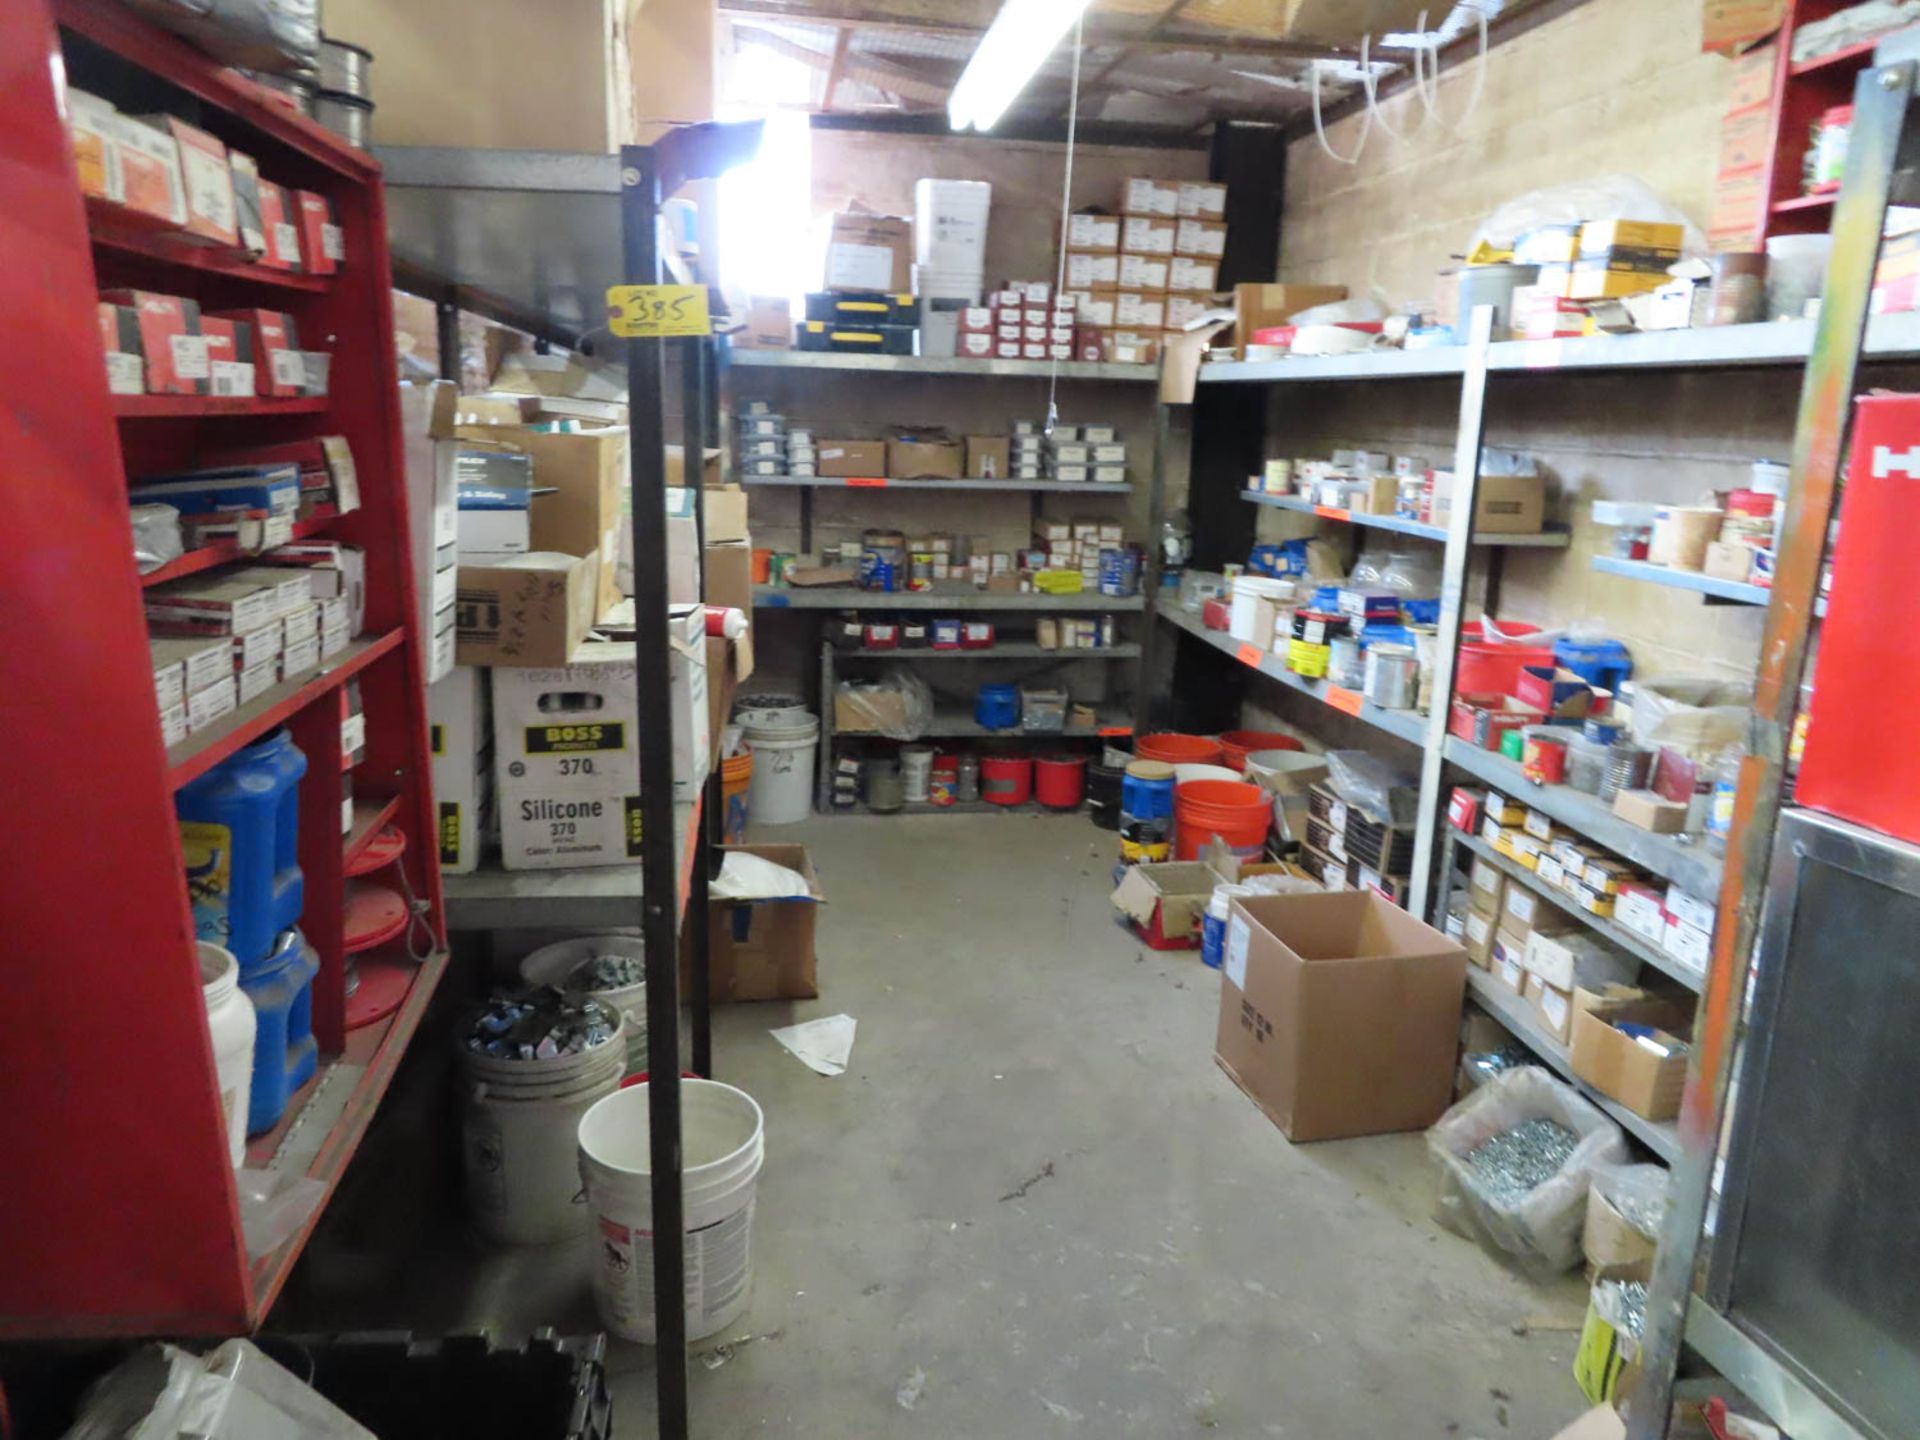 CONTENTS OF STOCK AREA: SCREWS, NUTS, BOLTS, SHELVES, CLAMPS, SEALANTS, ETC. (NO CAGE)